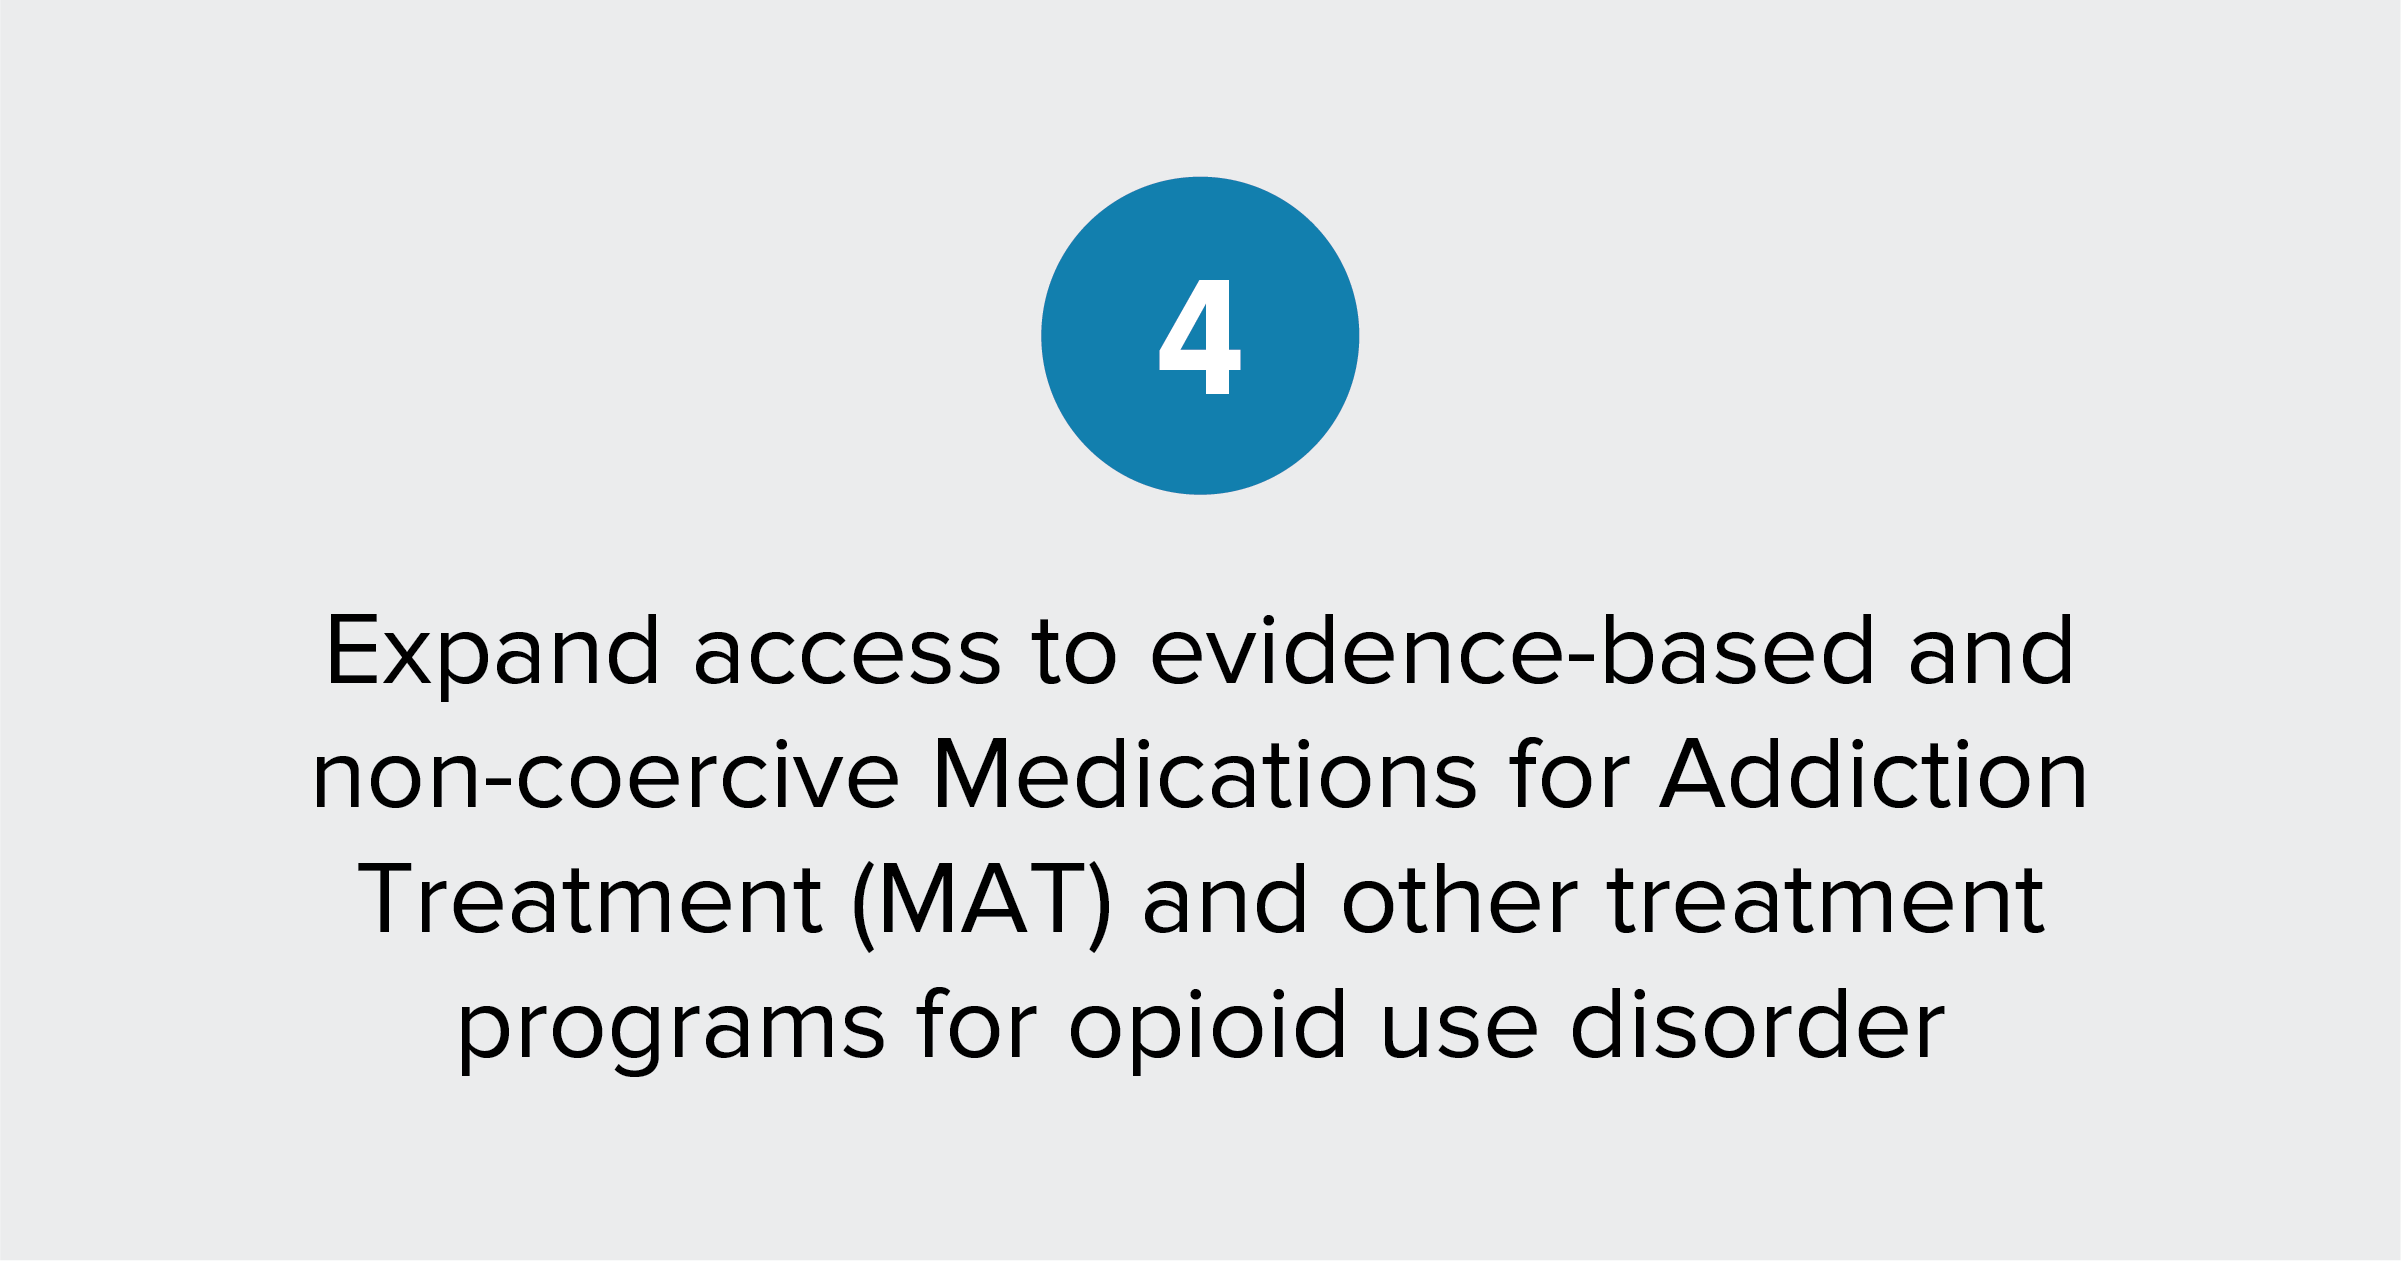 Text of report recommendation 4: Expand access to evidence-based and non-coercive Medications for Addiction Treatment (MAT) and other treatment programs for opioid use disorder